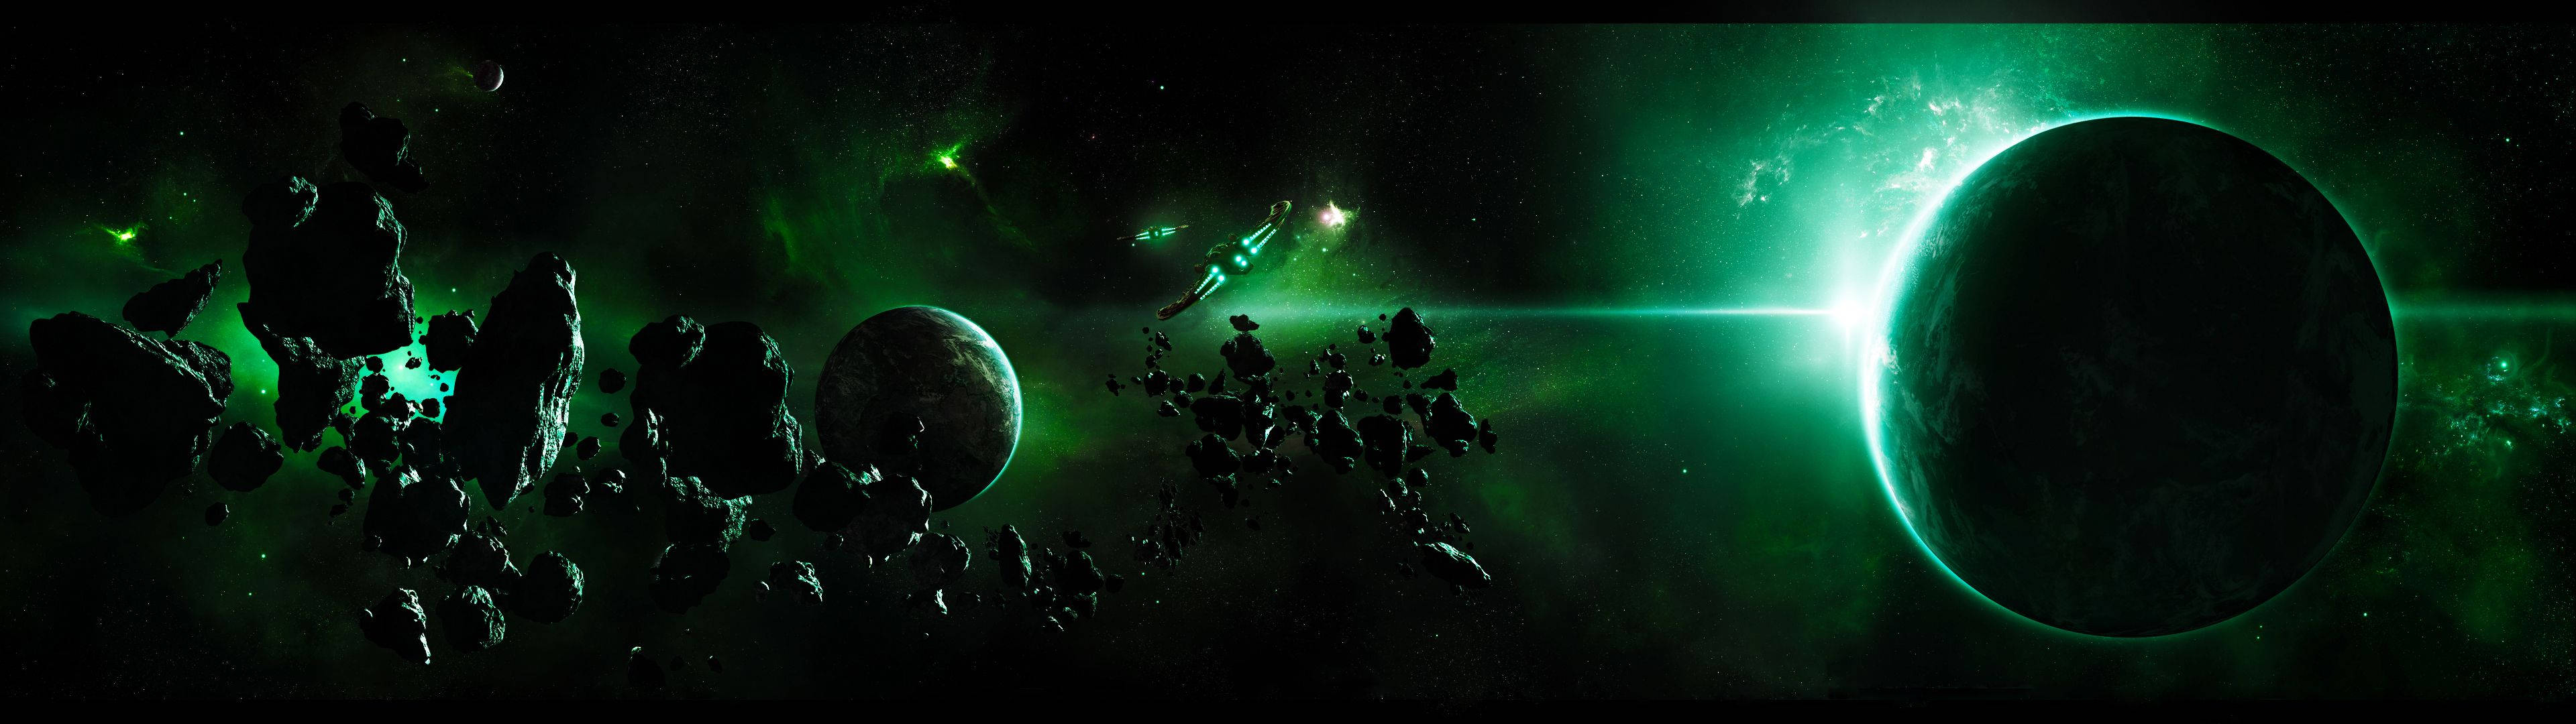 3 Monitor Green Planets Background